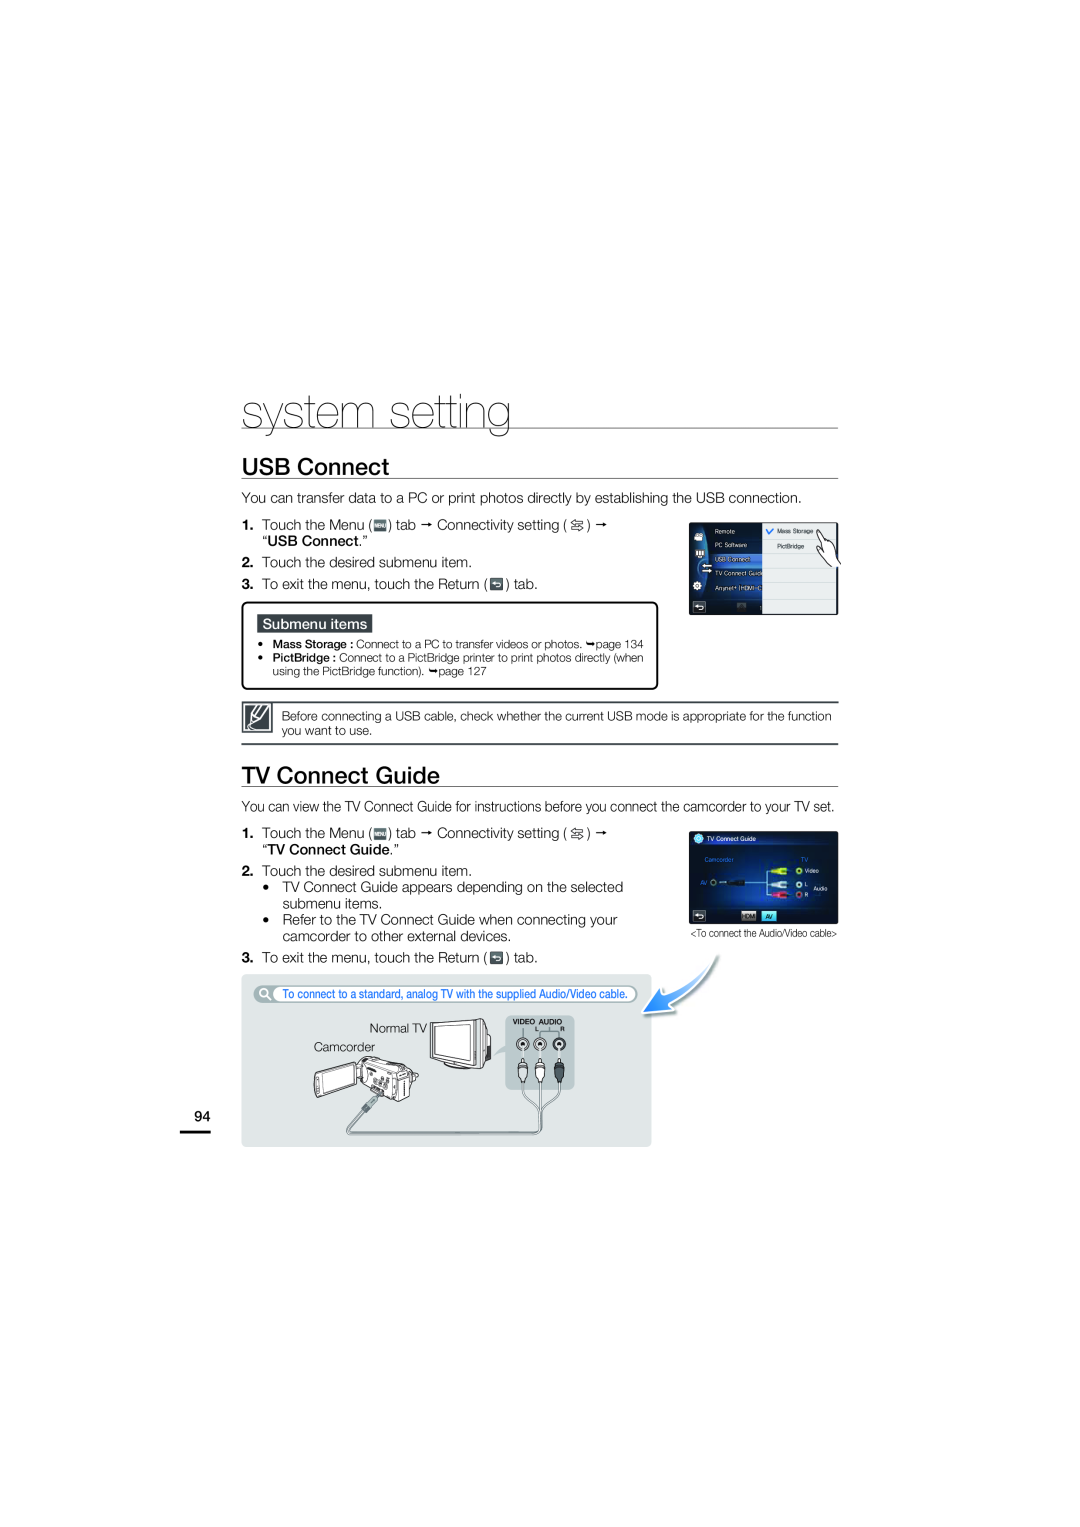 Samsung HMX-S15BN/XAA, HMX-S10BN/XAA USB Connect, TV Connect Guide, system setting, Submenu items, Normal TV Camcorder 